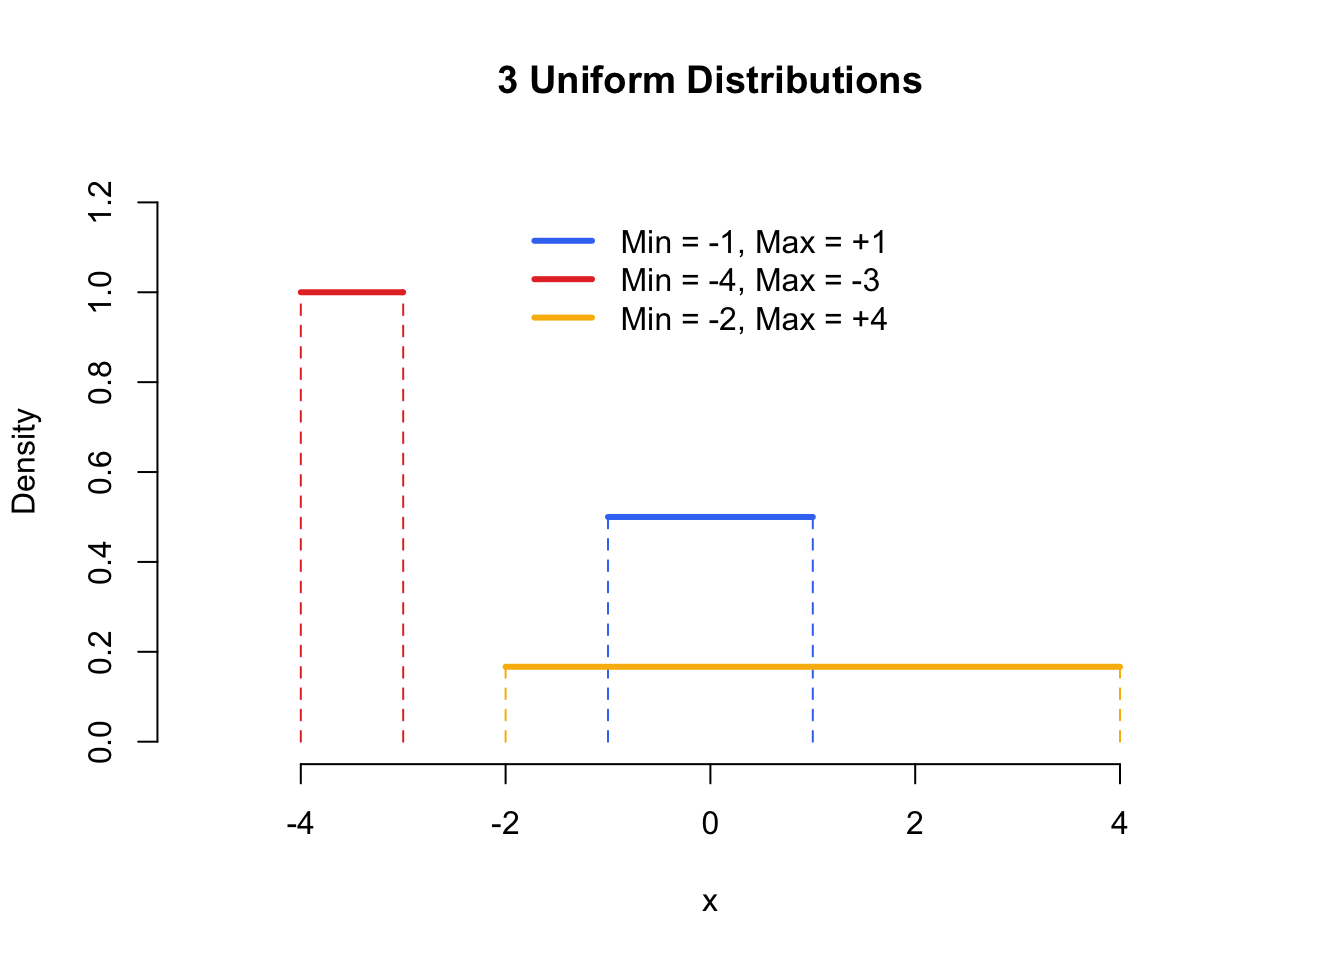 The Uniform distribution - known colloquially as the Anthony Davis distribution.